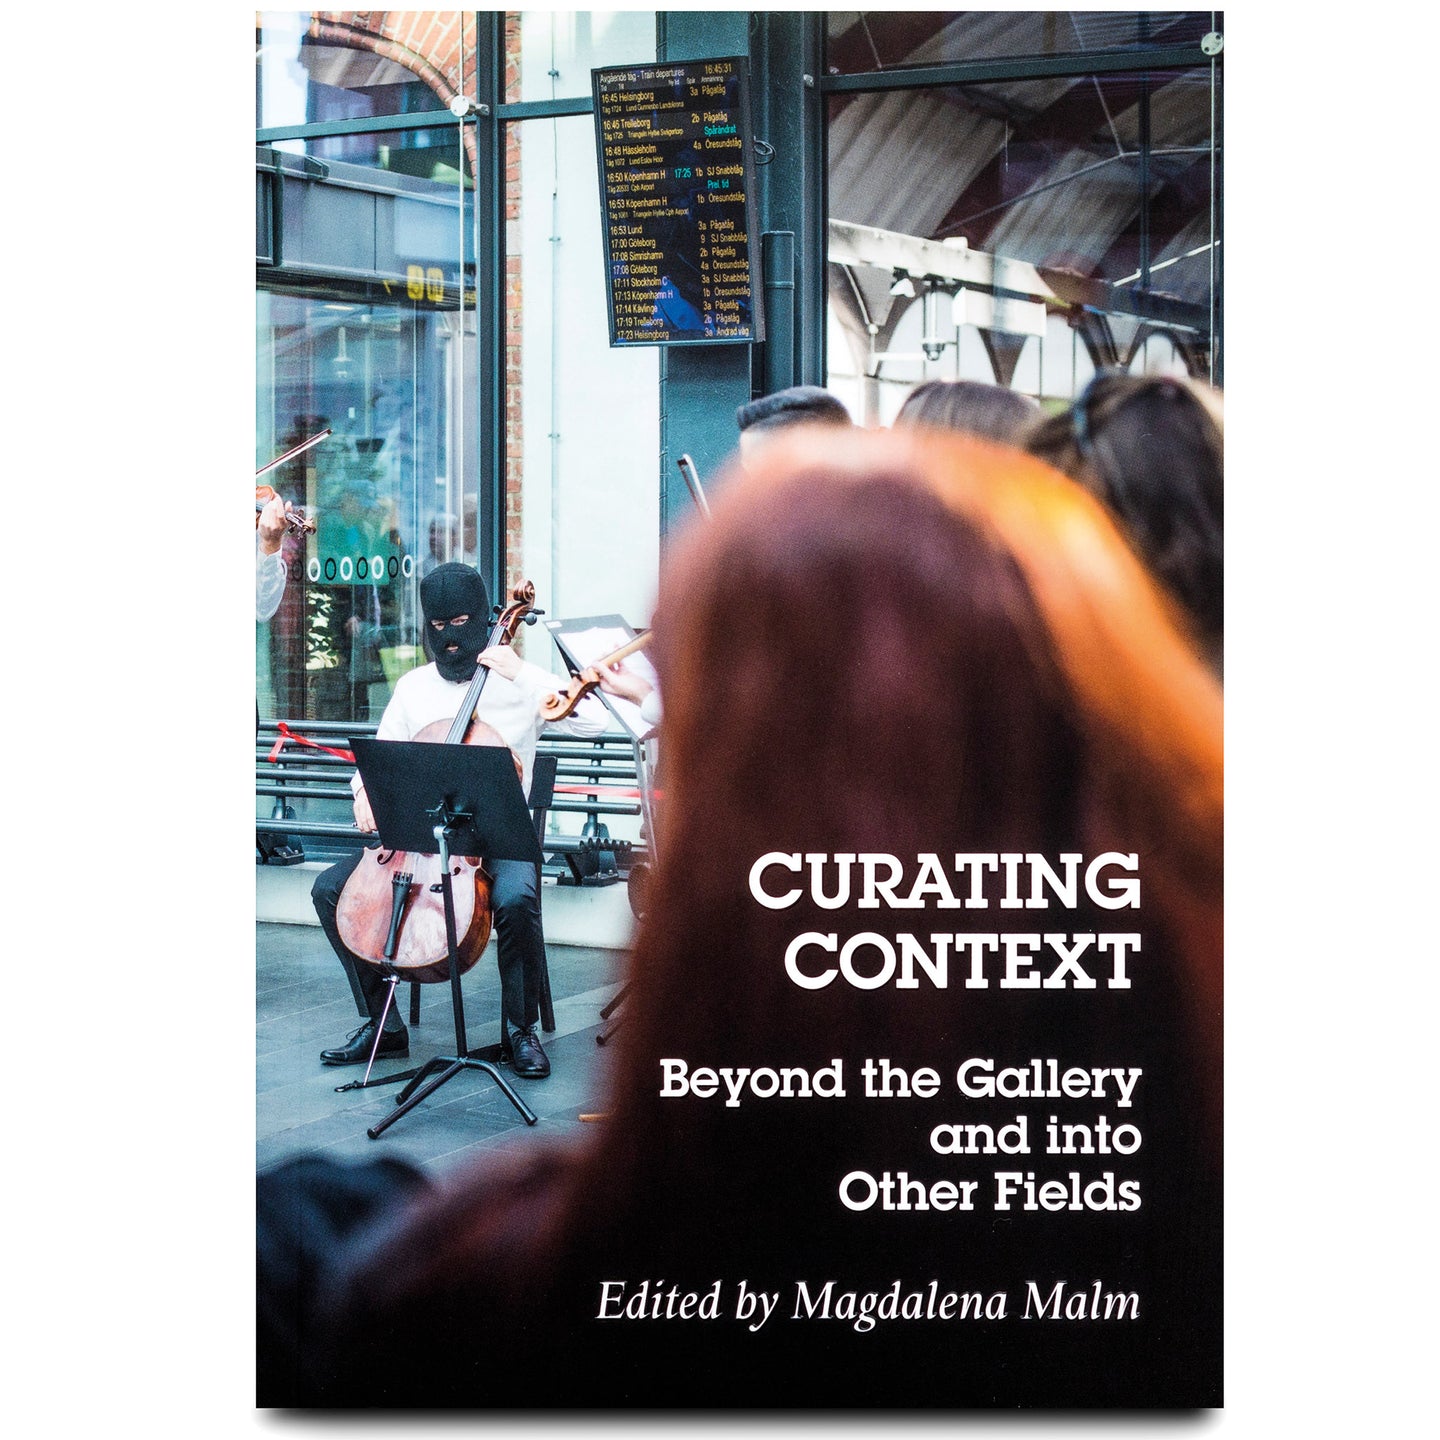 CURATING CONTEXT: BEYOND THE GALLERY AND INTO OTHER FIELDS